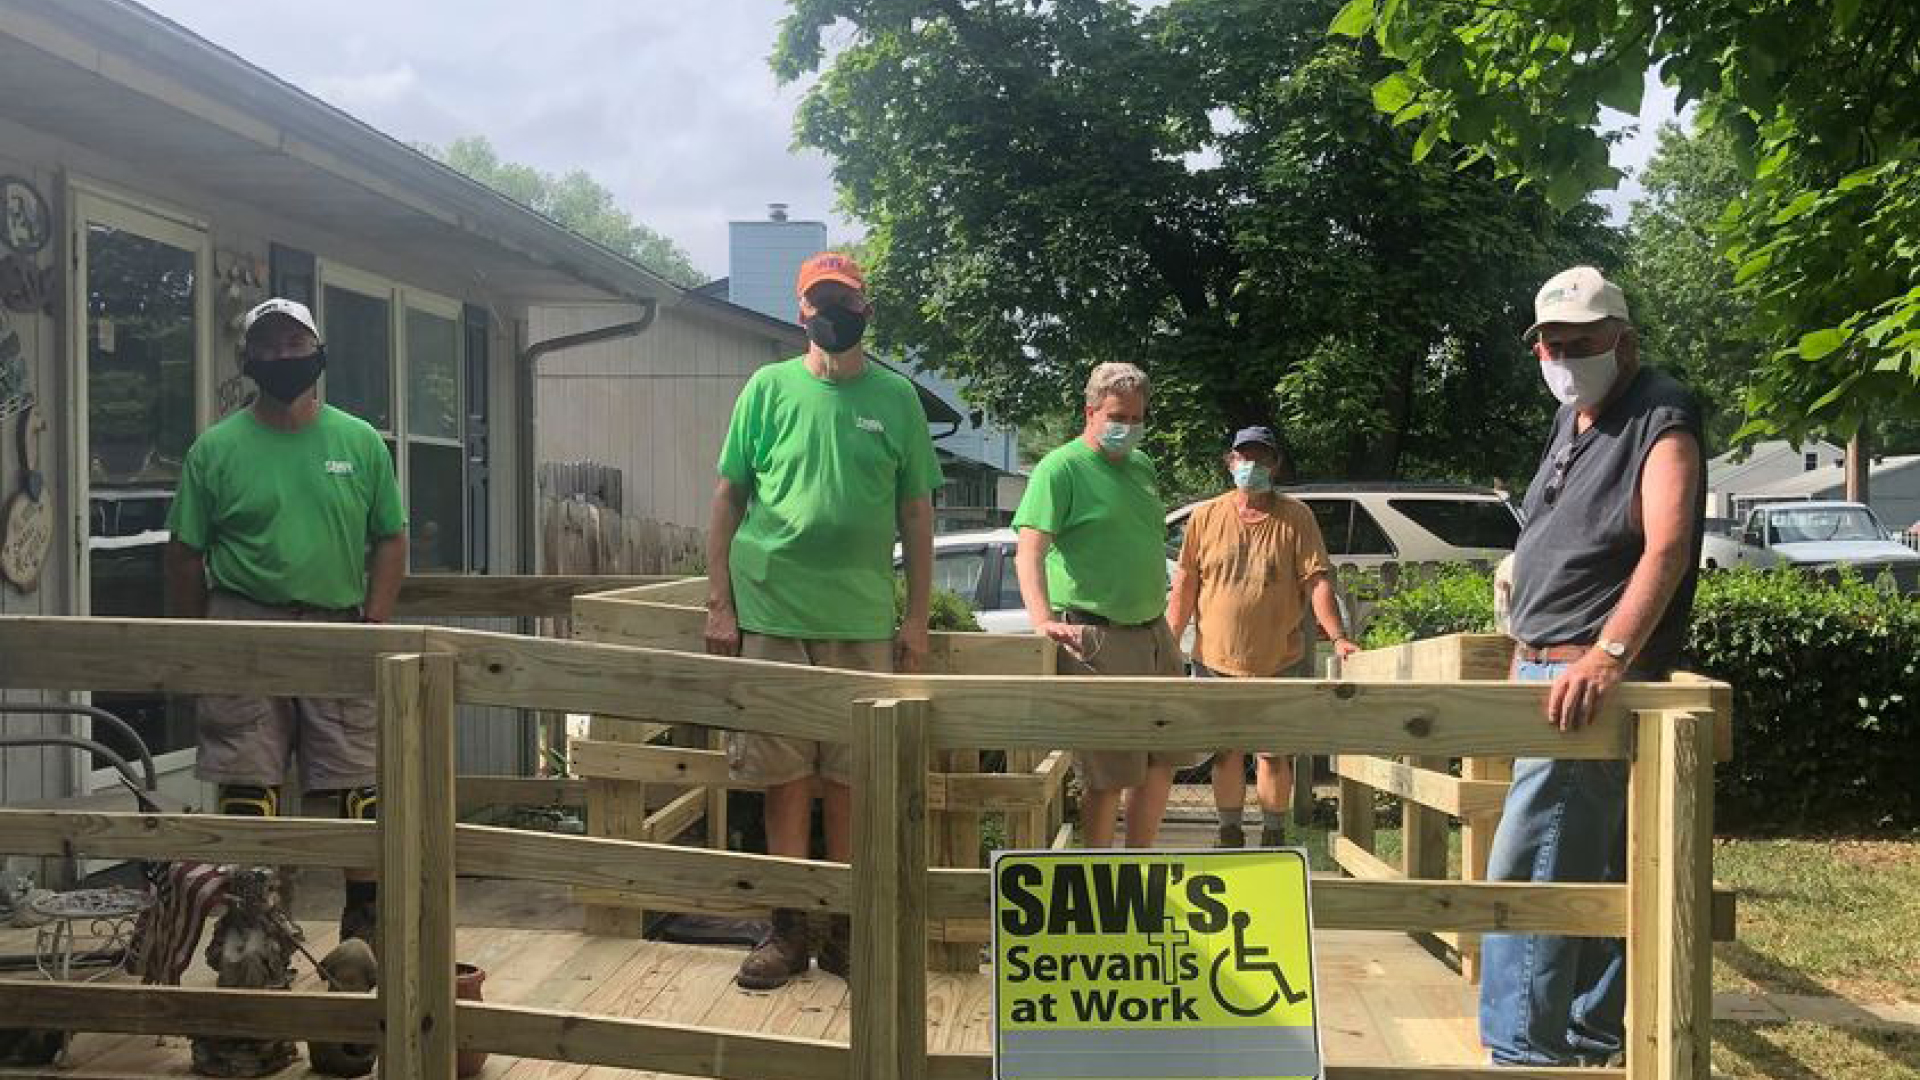 SAWs Ramp Building
Volunteer opportunities for age 12 and up. No experience necessary!
